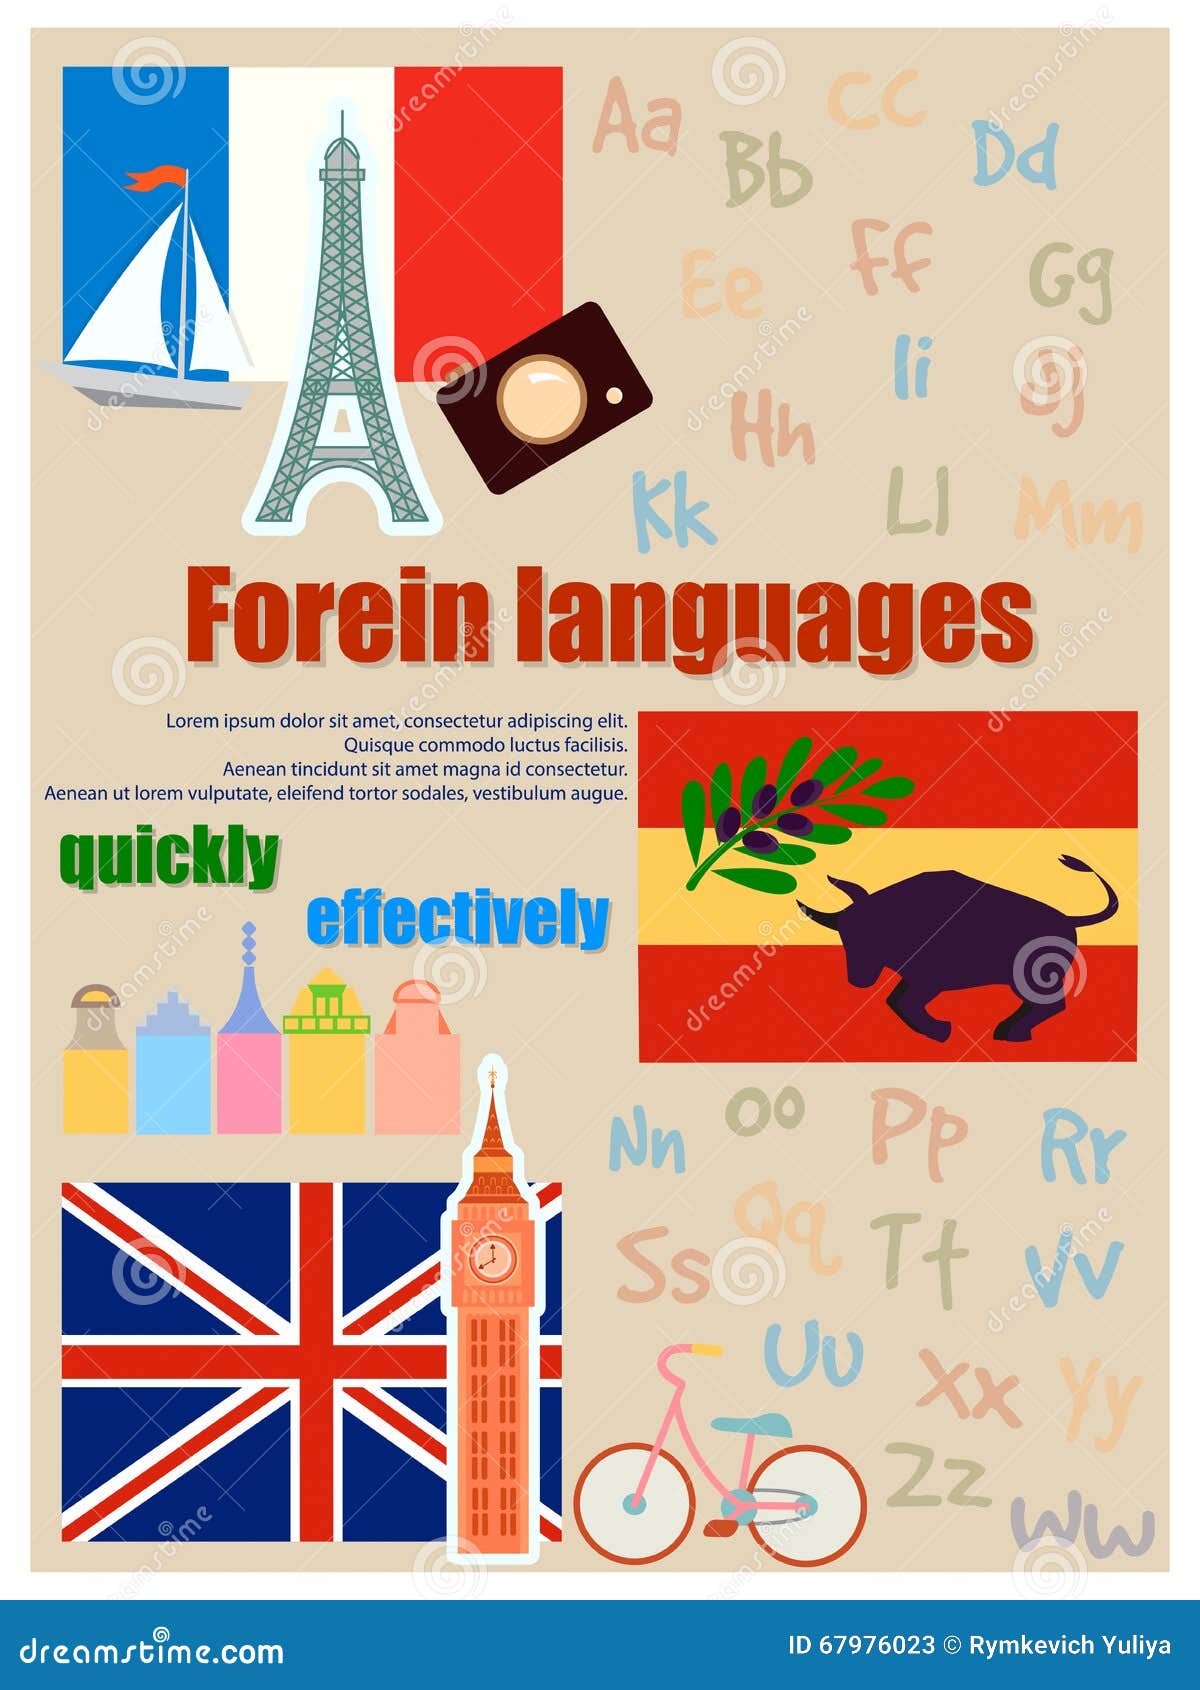 Poster For Foreign Language Courses Stock Vector - Image ...